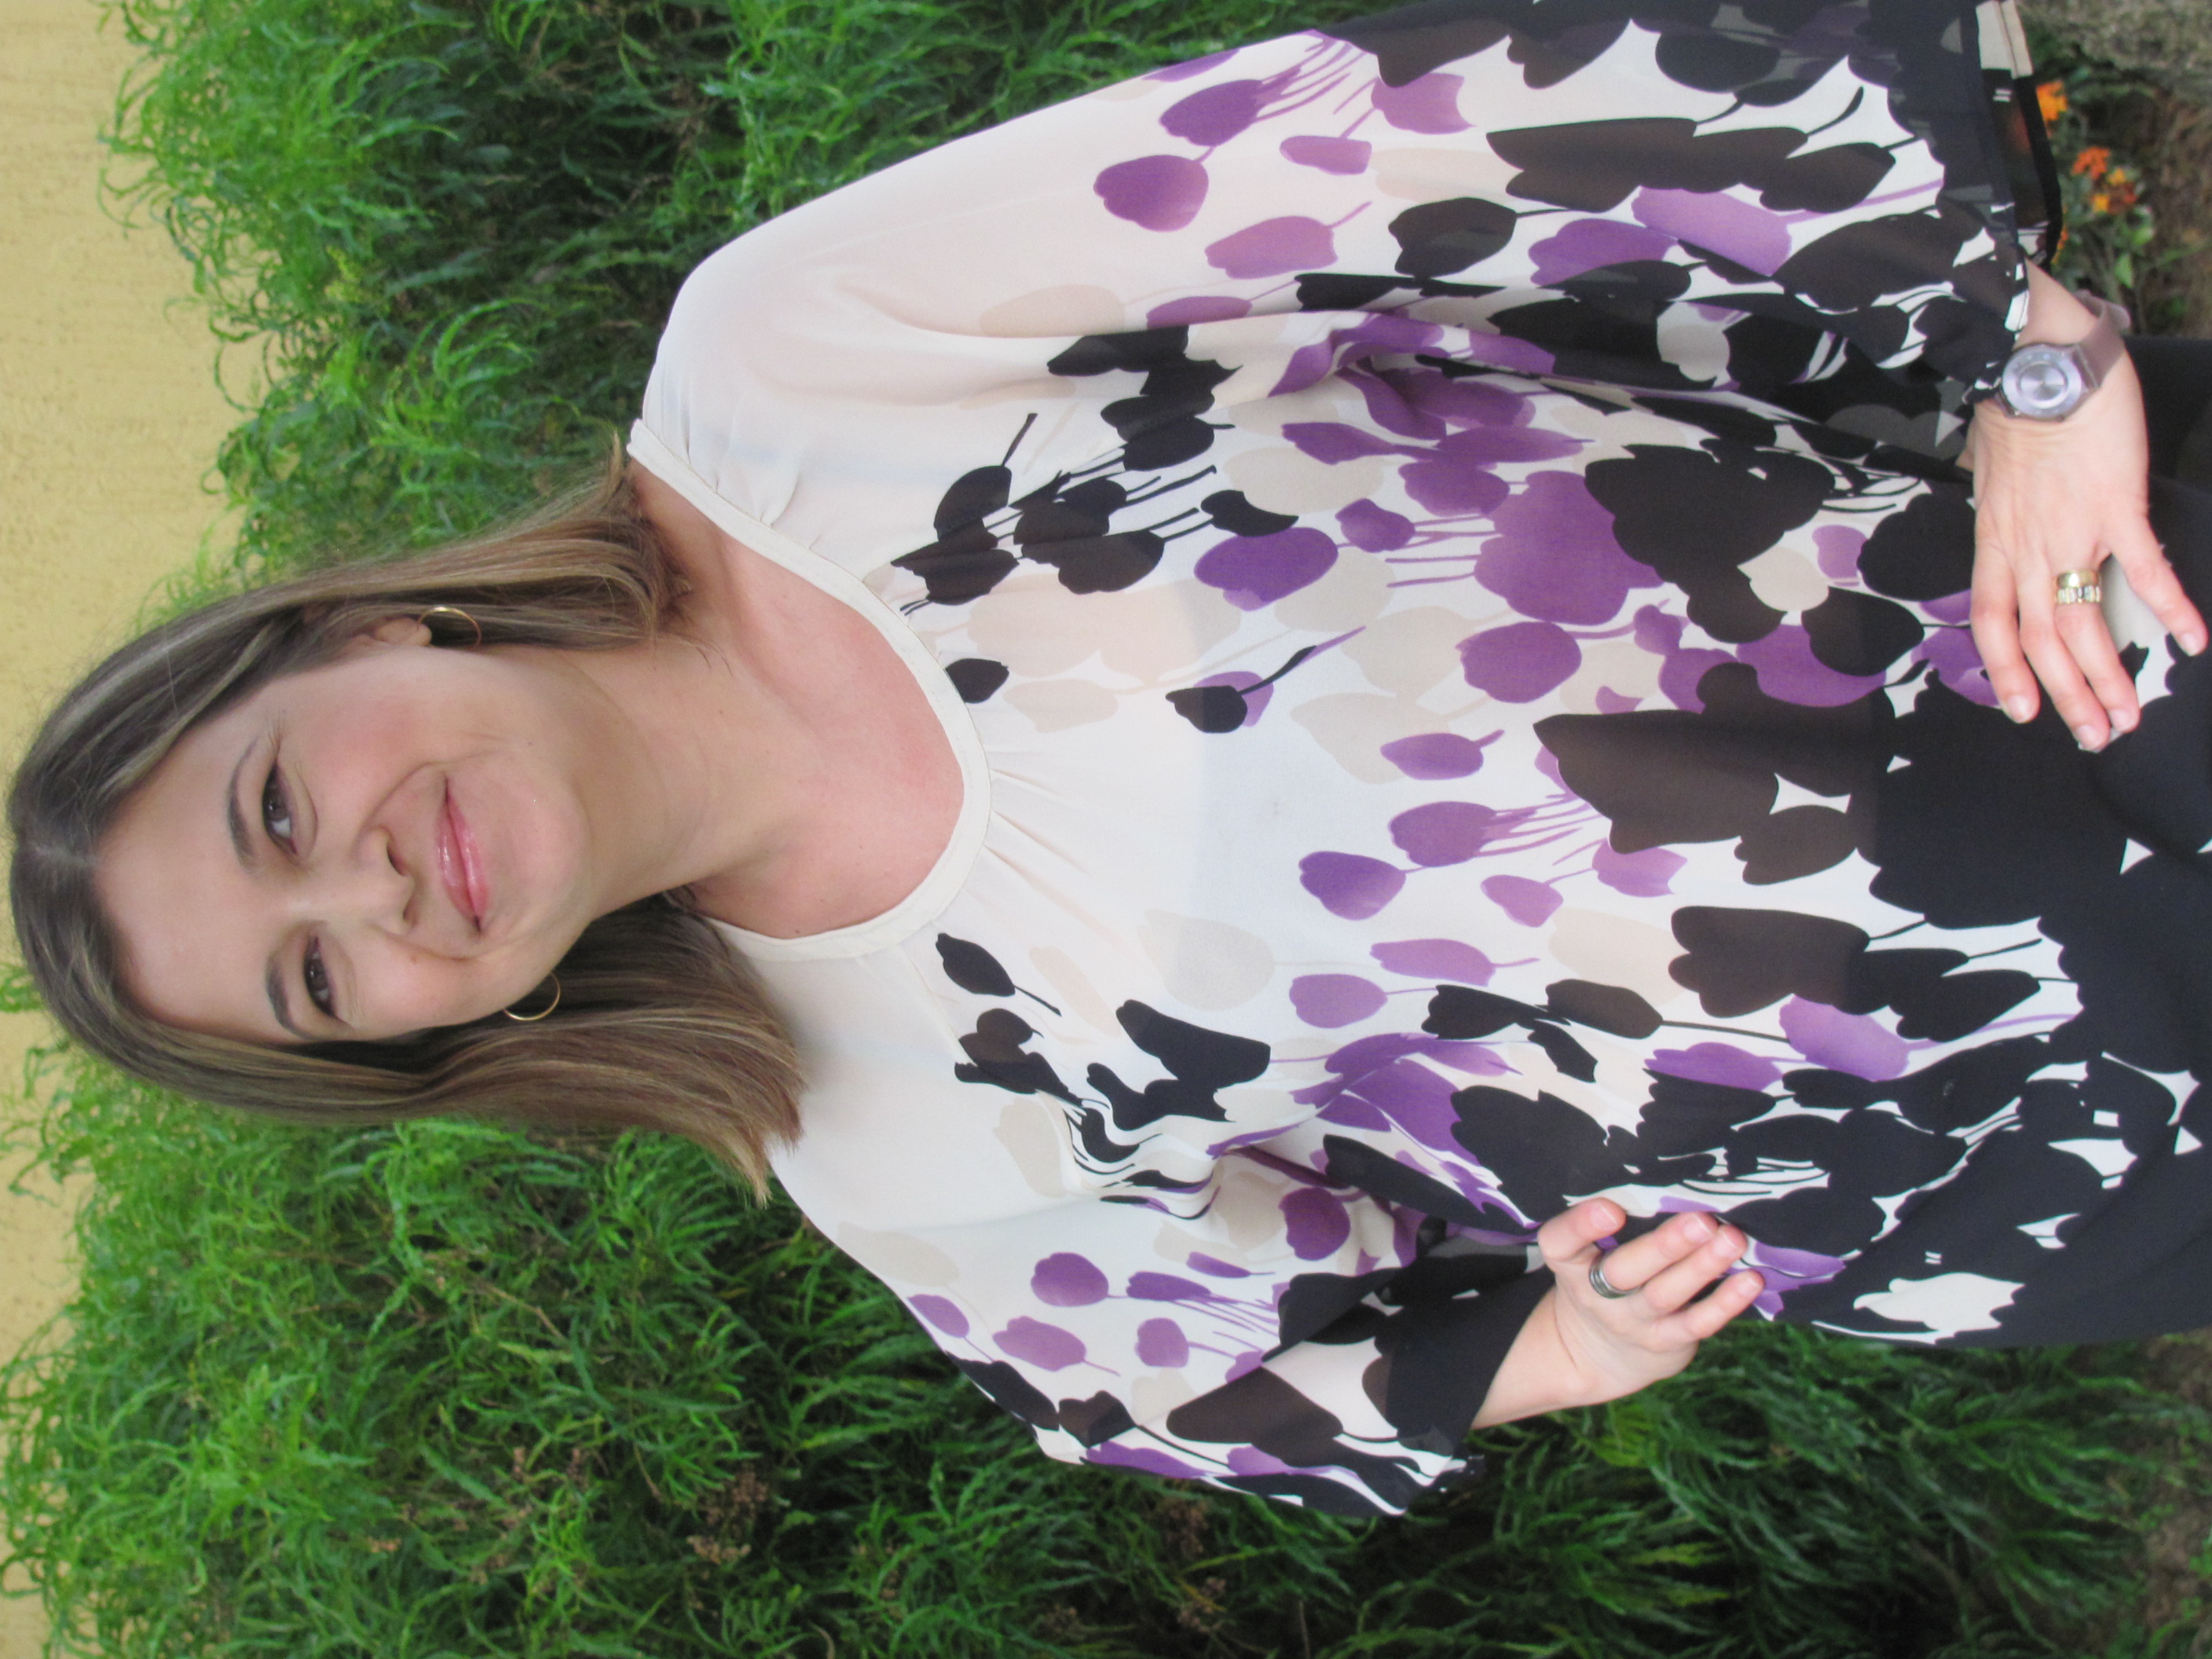 Print border blouse – Sewing Projects | BurdaStyle.com